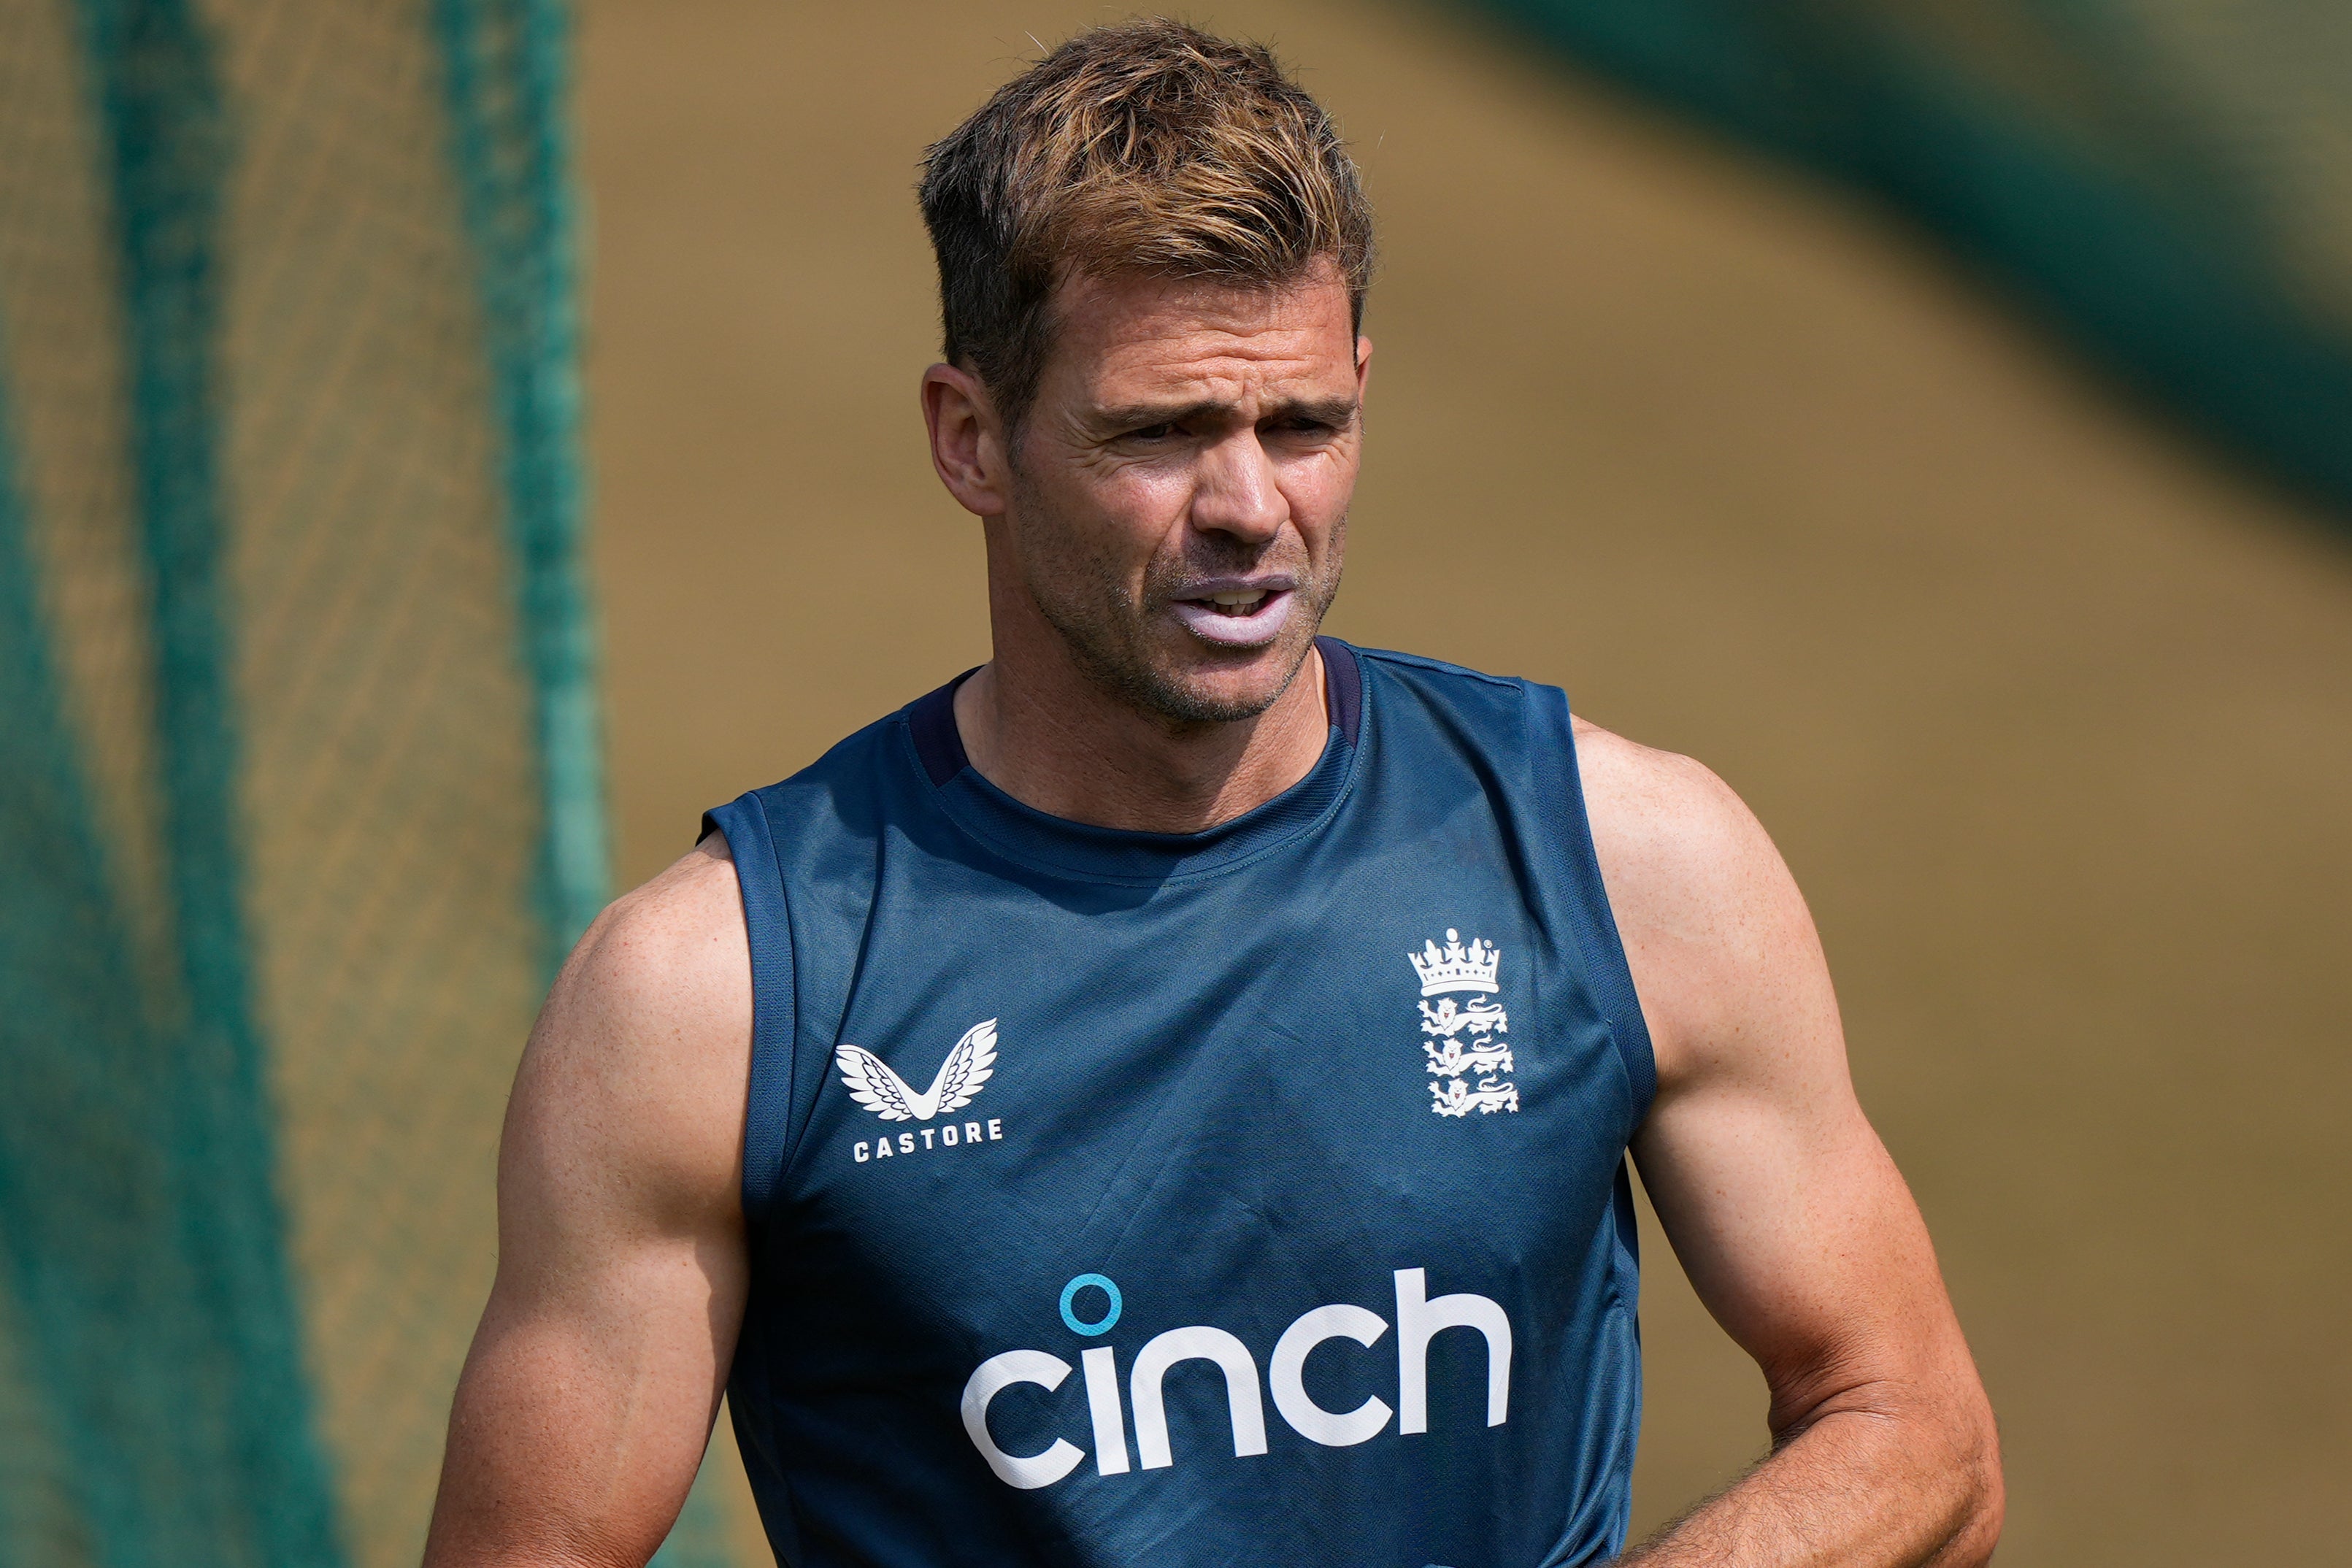 James Anderson is in the England team for the second Test